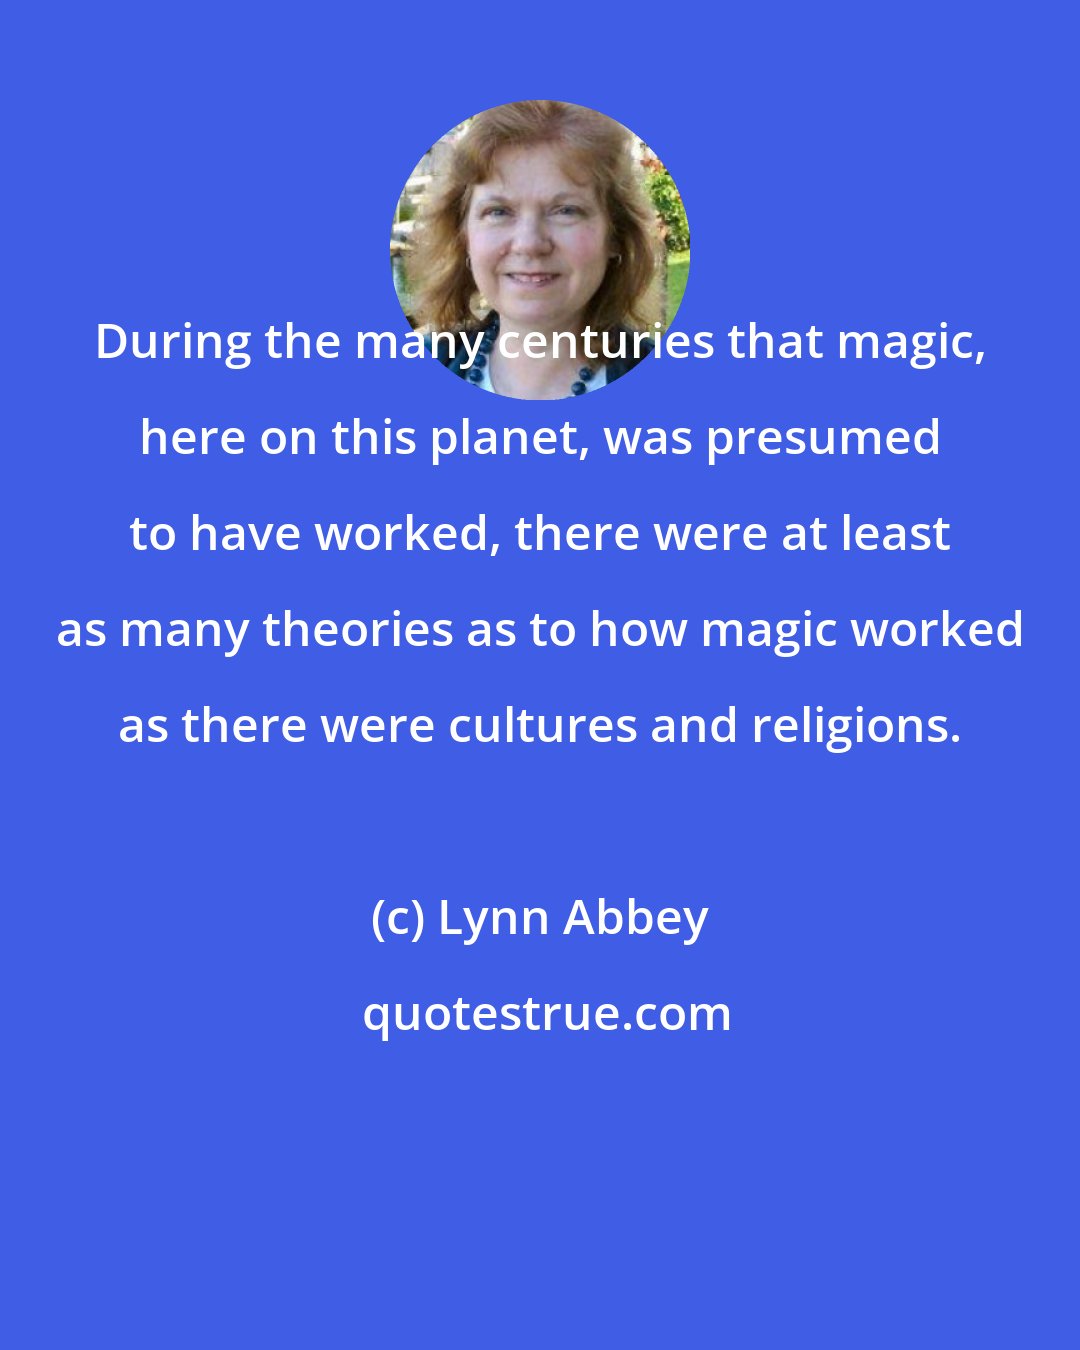 Lynn Abbey: During the many centuries that magic, here on this planet, was presumed to have worked, there were at least as many theories as to how magic worked as there were cultures and religions.